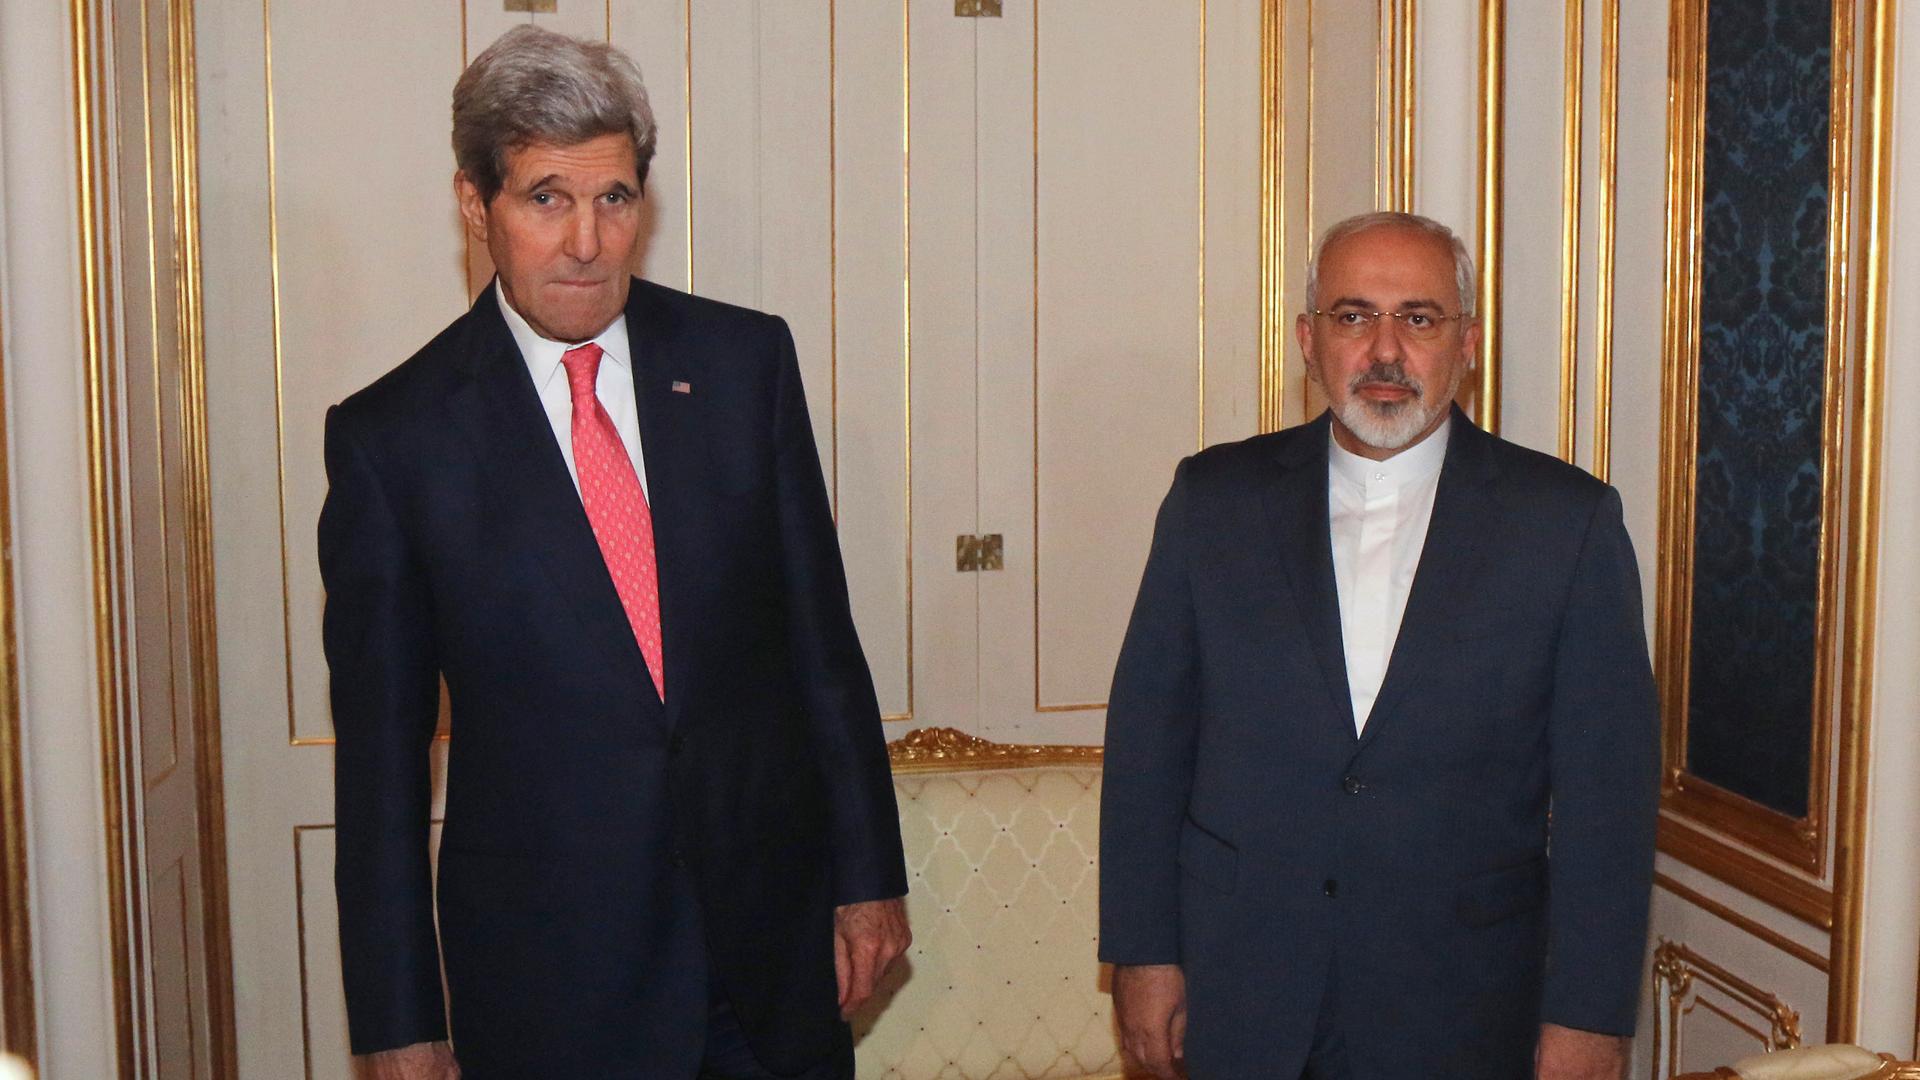 U.S. Secretary of State John Kerry and Iranian Foreign Minister Javad Zarif both say a landmark nuclear deal might still be possible.